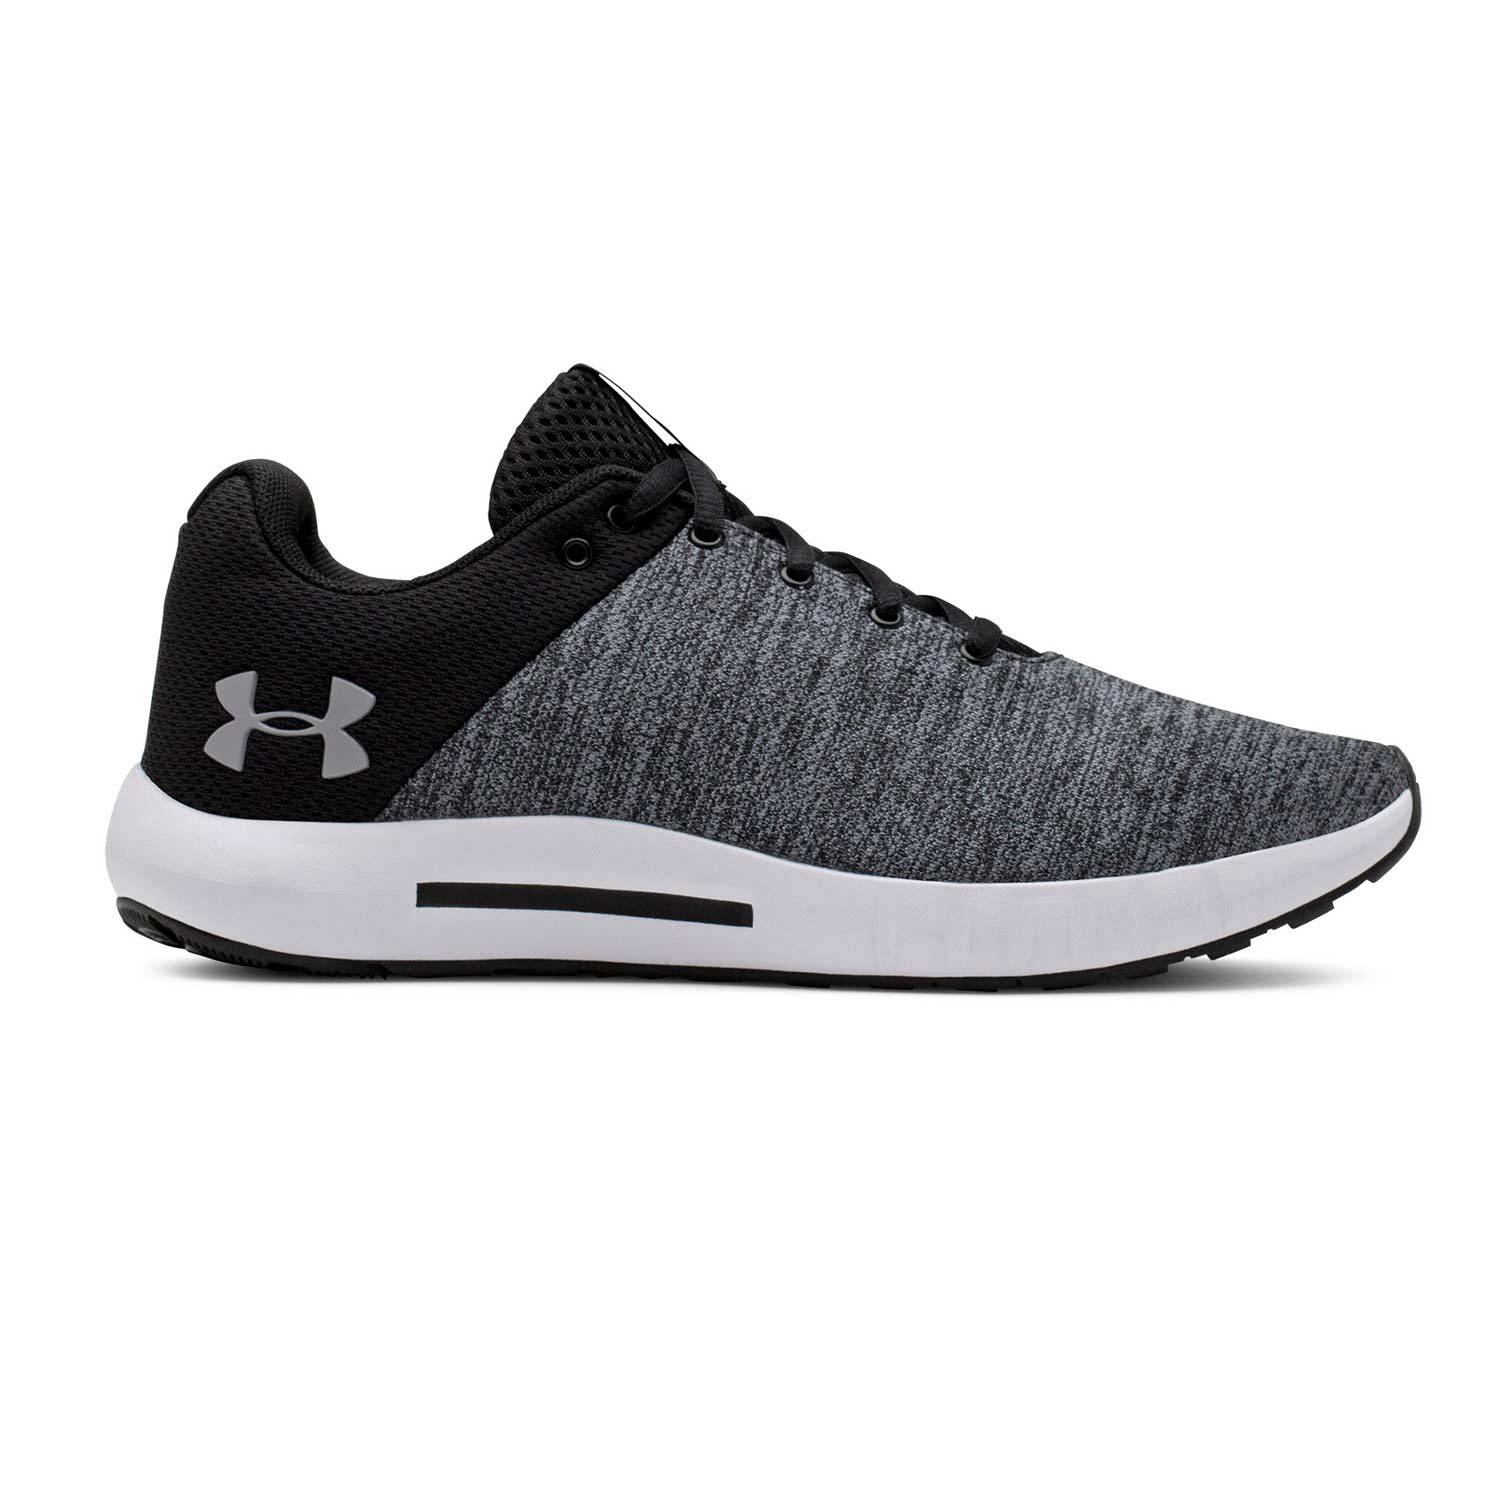 UNDER ARMOUR	WOMEN’S MICRO G PURSUIT TWIST RUNNING SHOES